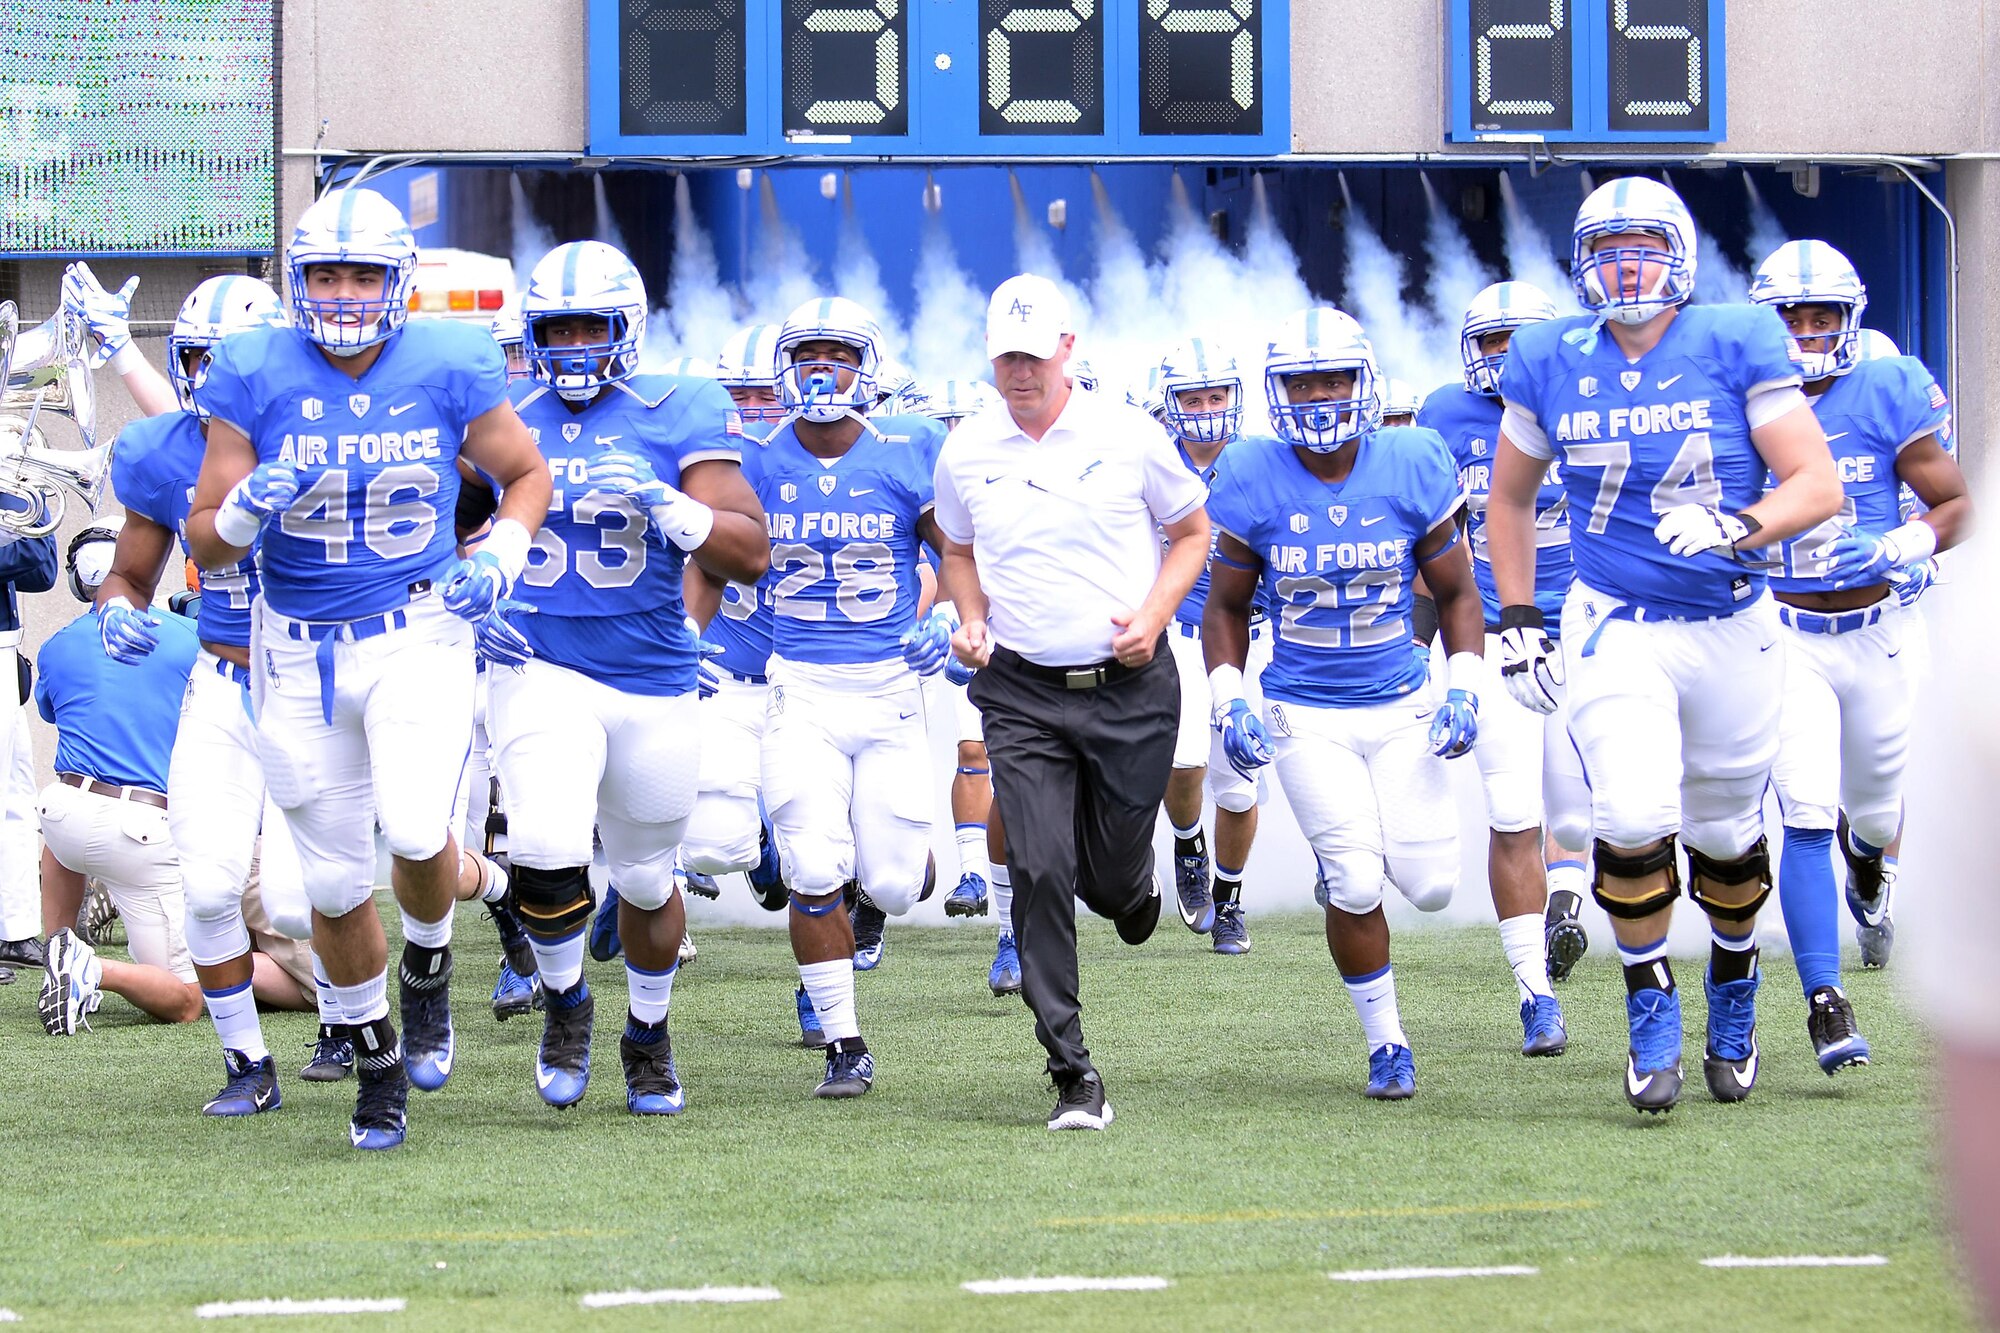 Falcons' head coach Troy Calhoun leads Air Force on to the field at Falcon Stadium, Sept. 3, to take on the Abilene Christian University Wildcats. Air Force beat Abilene 37-21. (U.S. Air Force photo/Darcie Ibidapo) 